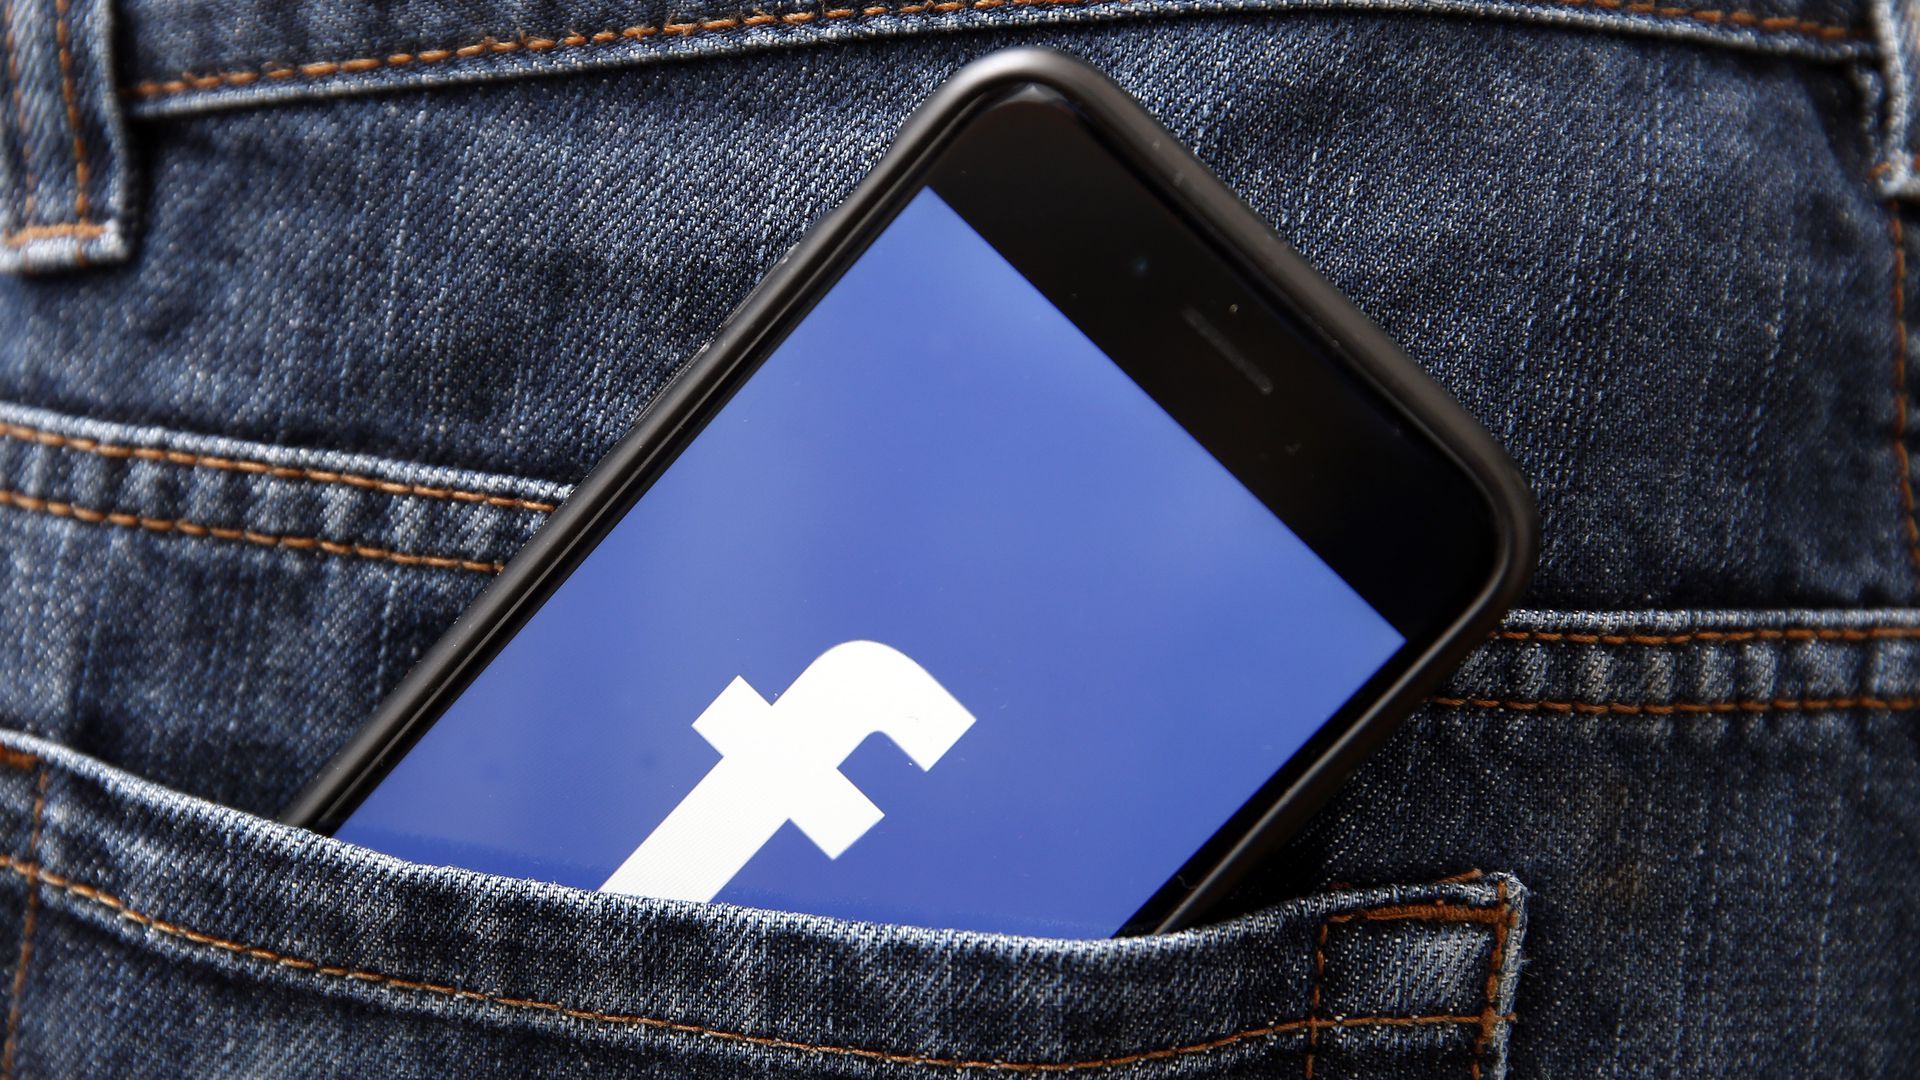 An image of a phone with the Facebook logo in a jeans pocket